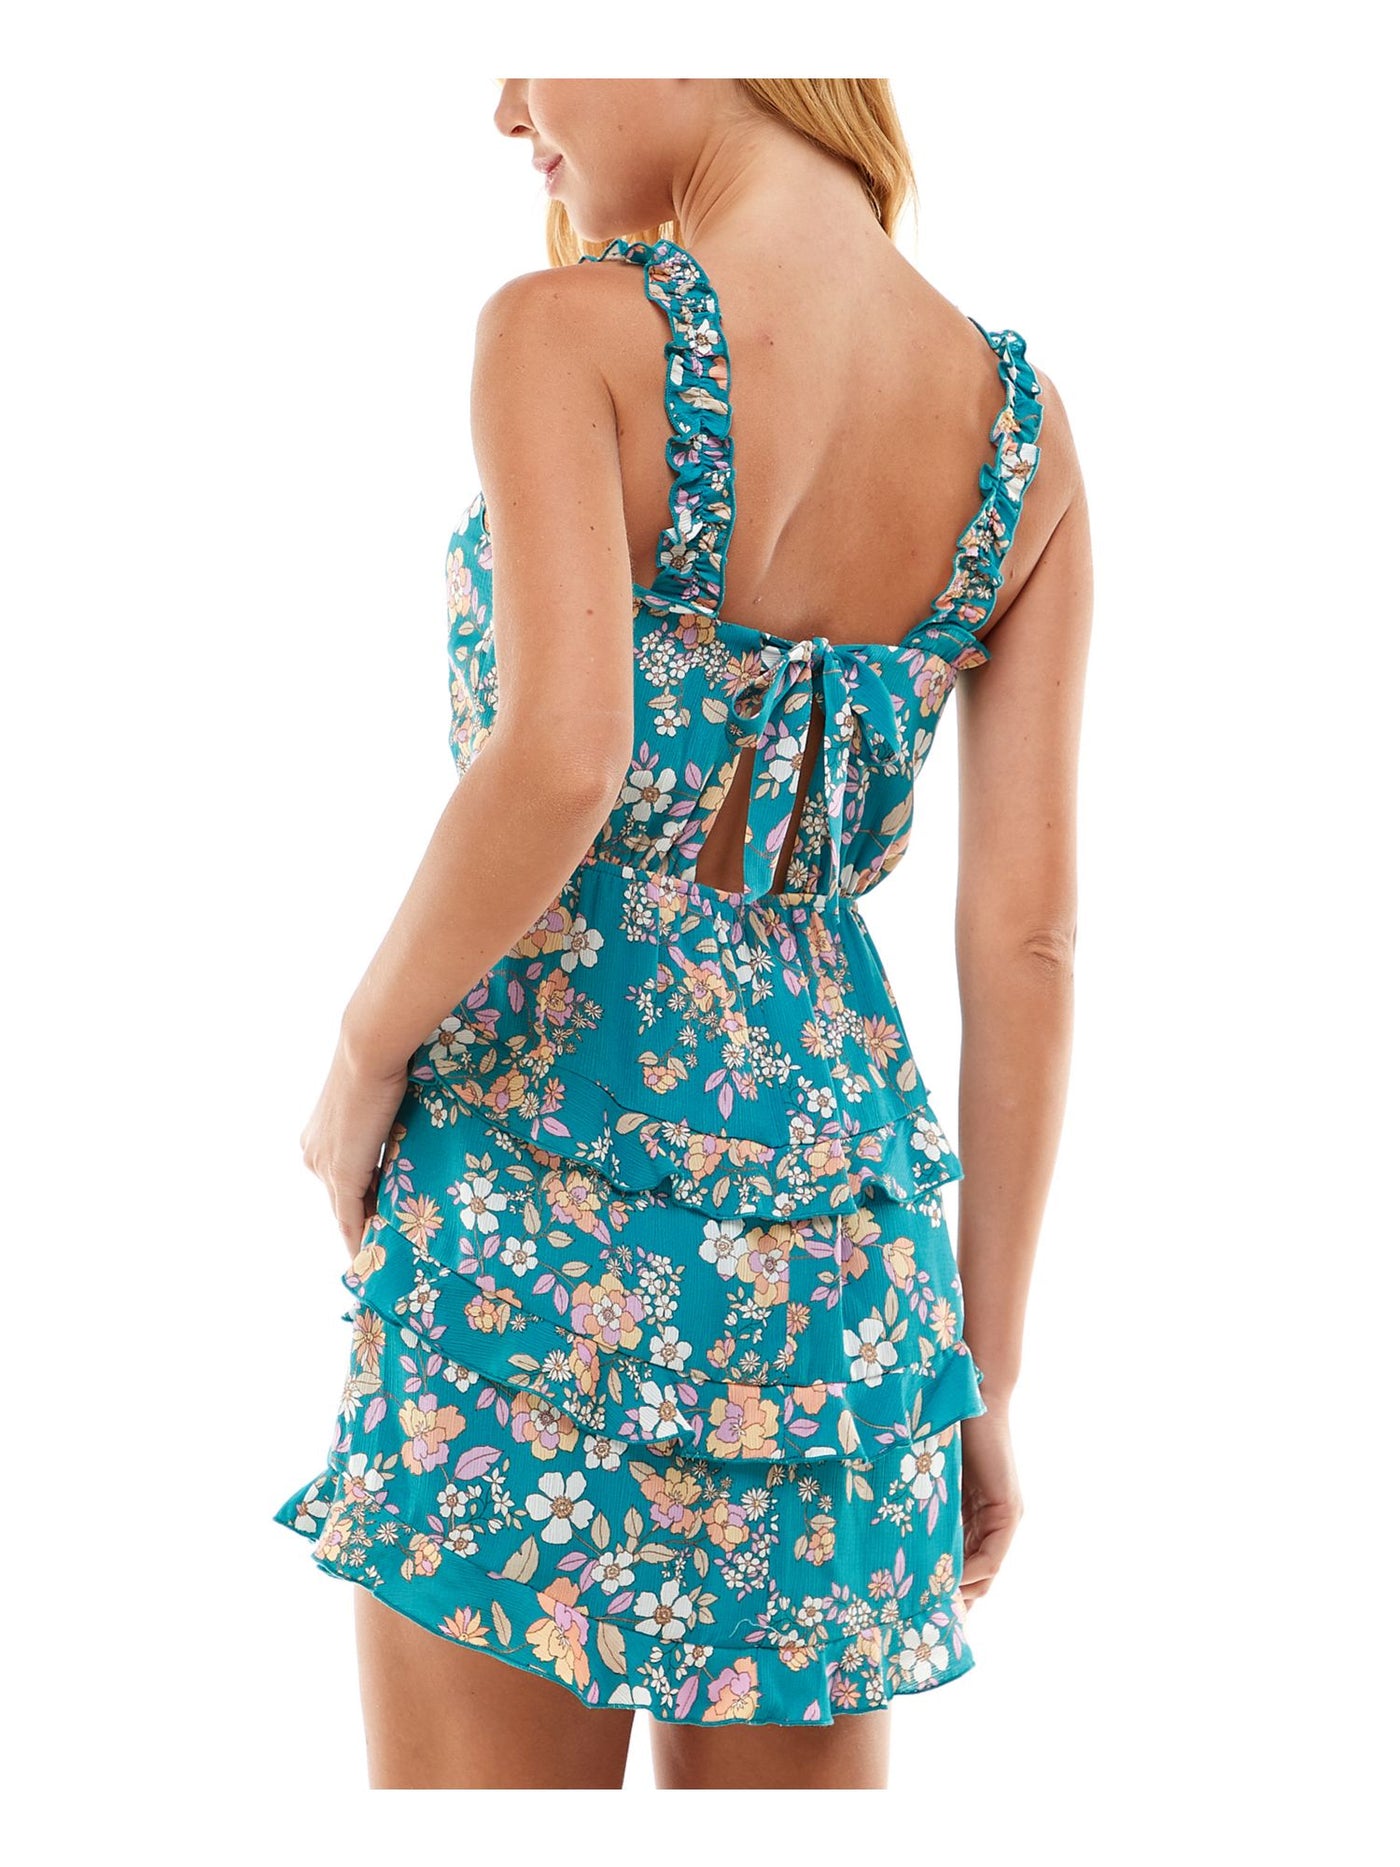 CITY STUDIO Womens Turquoise Ruffled Open Back Straight Neckline Back Tie Lined Floral Sleeveless Short Evening Fit + Flare Dress Juniors XL